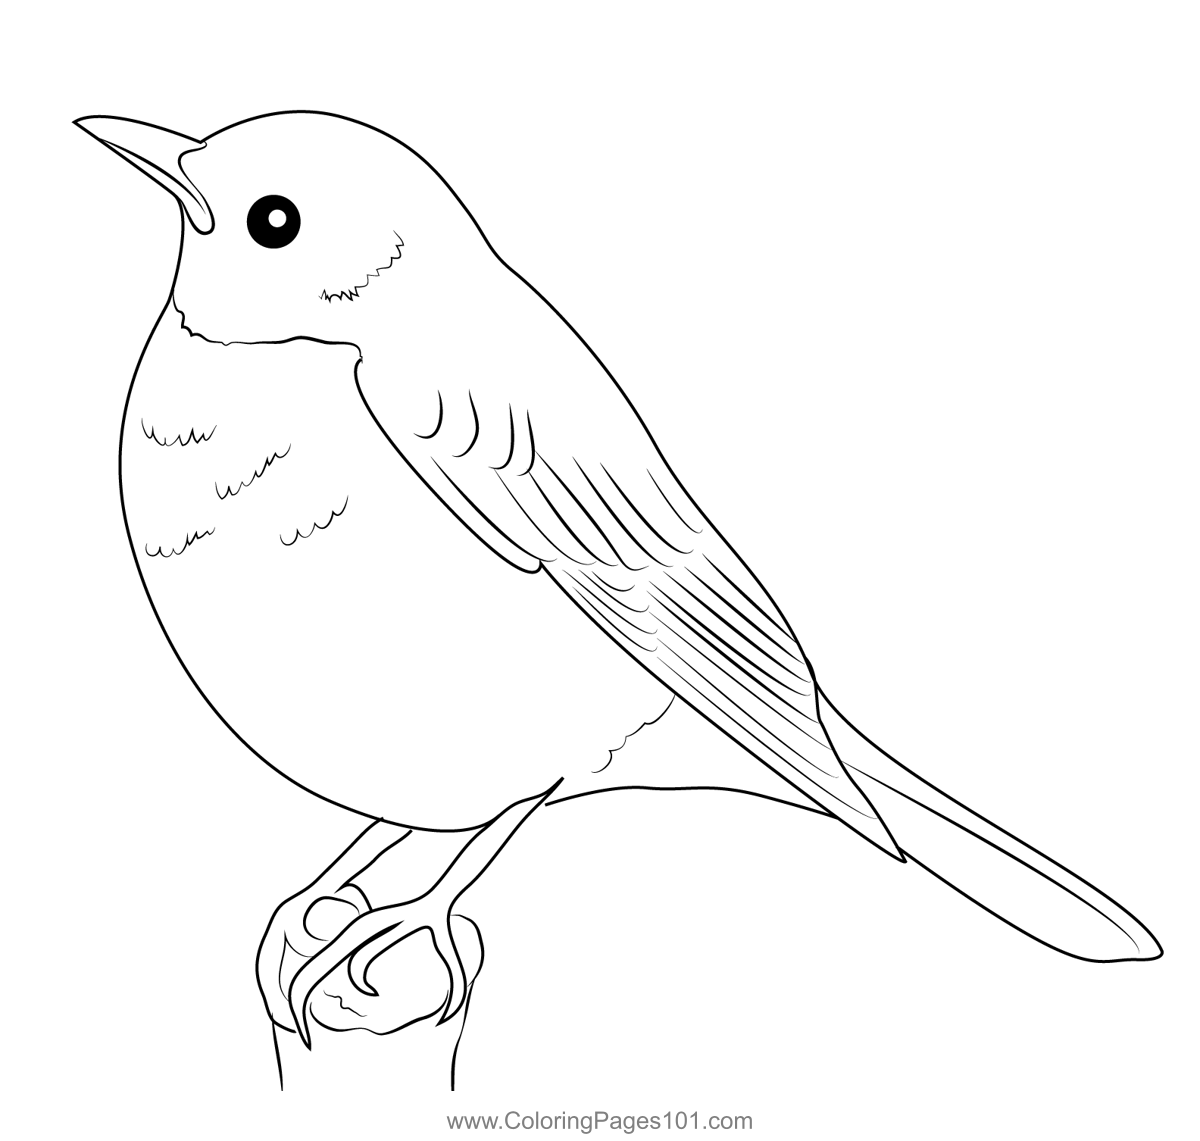 American Robin Coloring Page for Kids - Free Thrushes Printable ...